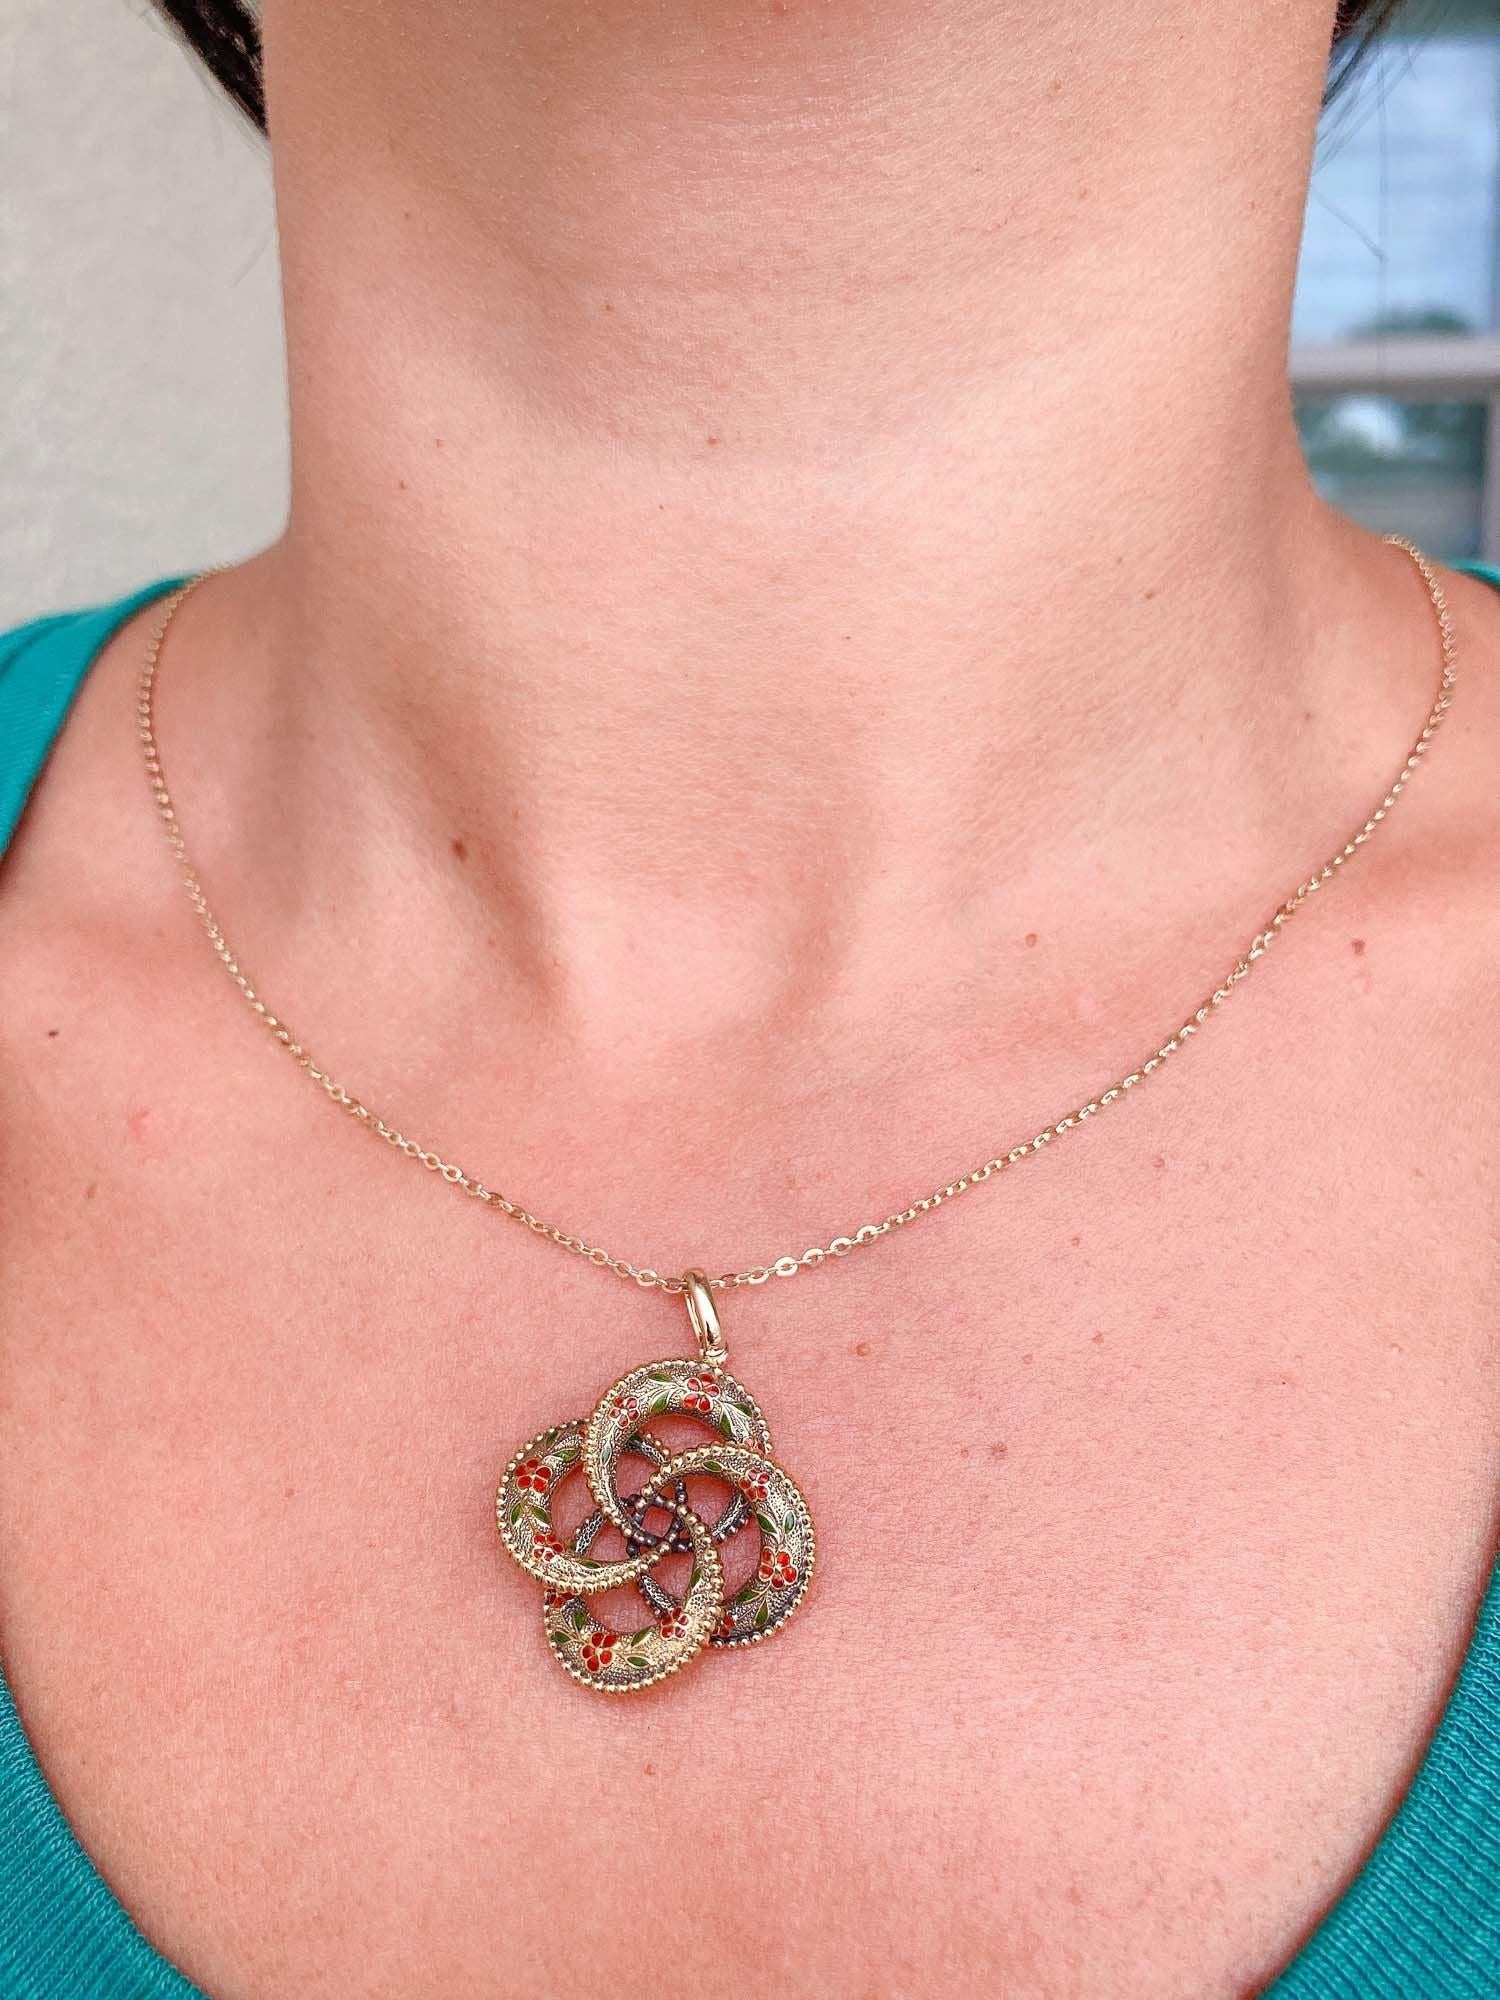 14k Gold Vintage Lover's Knot Enamel Pin Converted Pendant Charm R4141 In New Condition For Sale In Osprey, FL